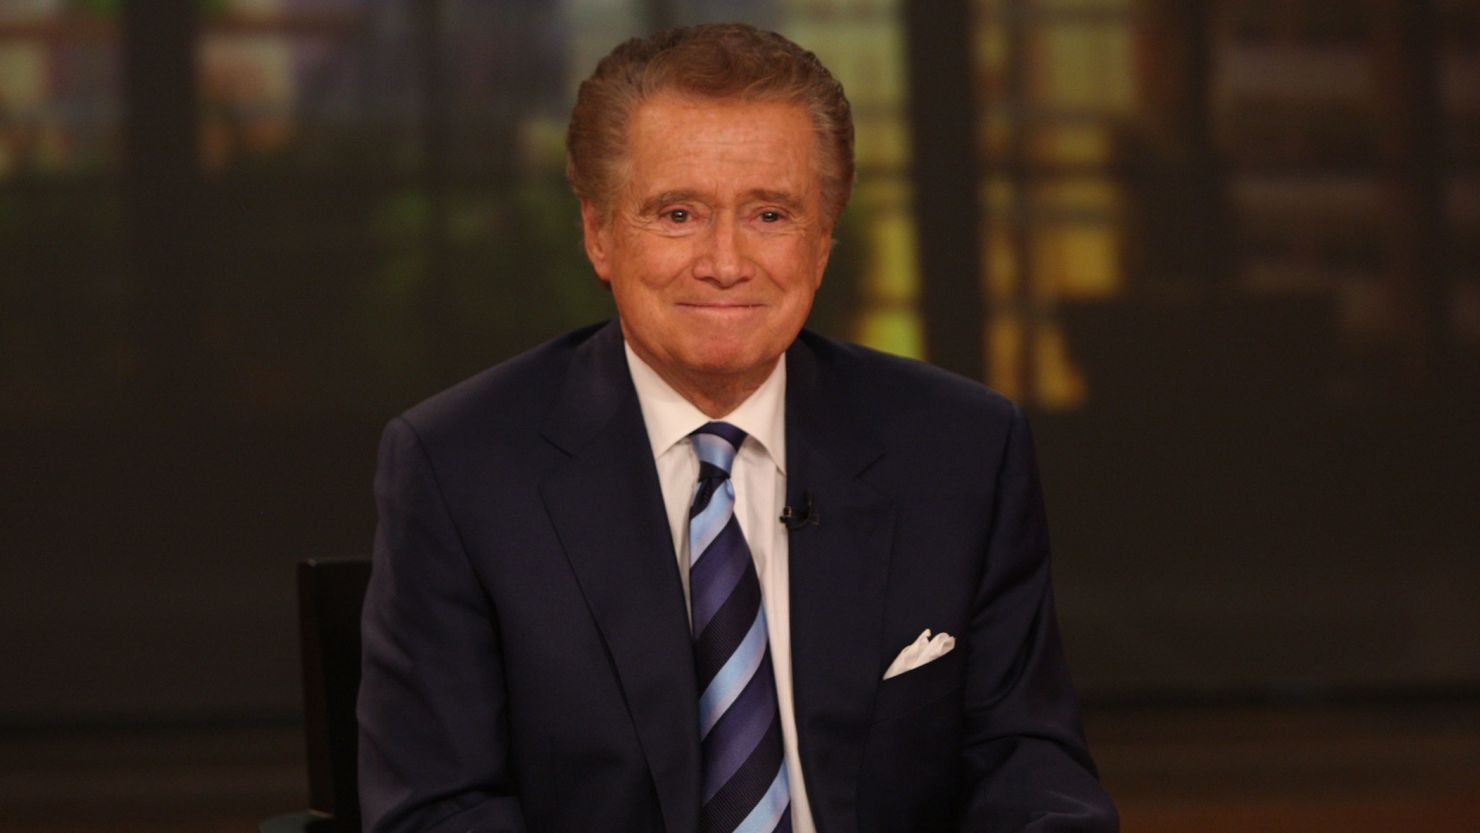 Regis Philbin at a November 2011 press conference on his departure from "Live with Regis and Kelly."